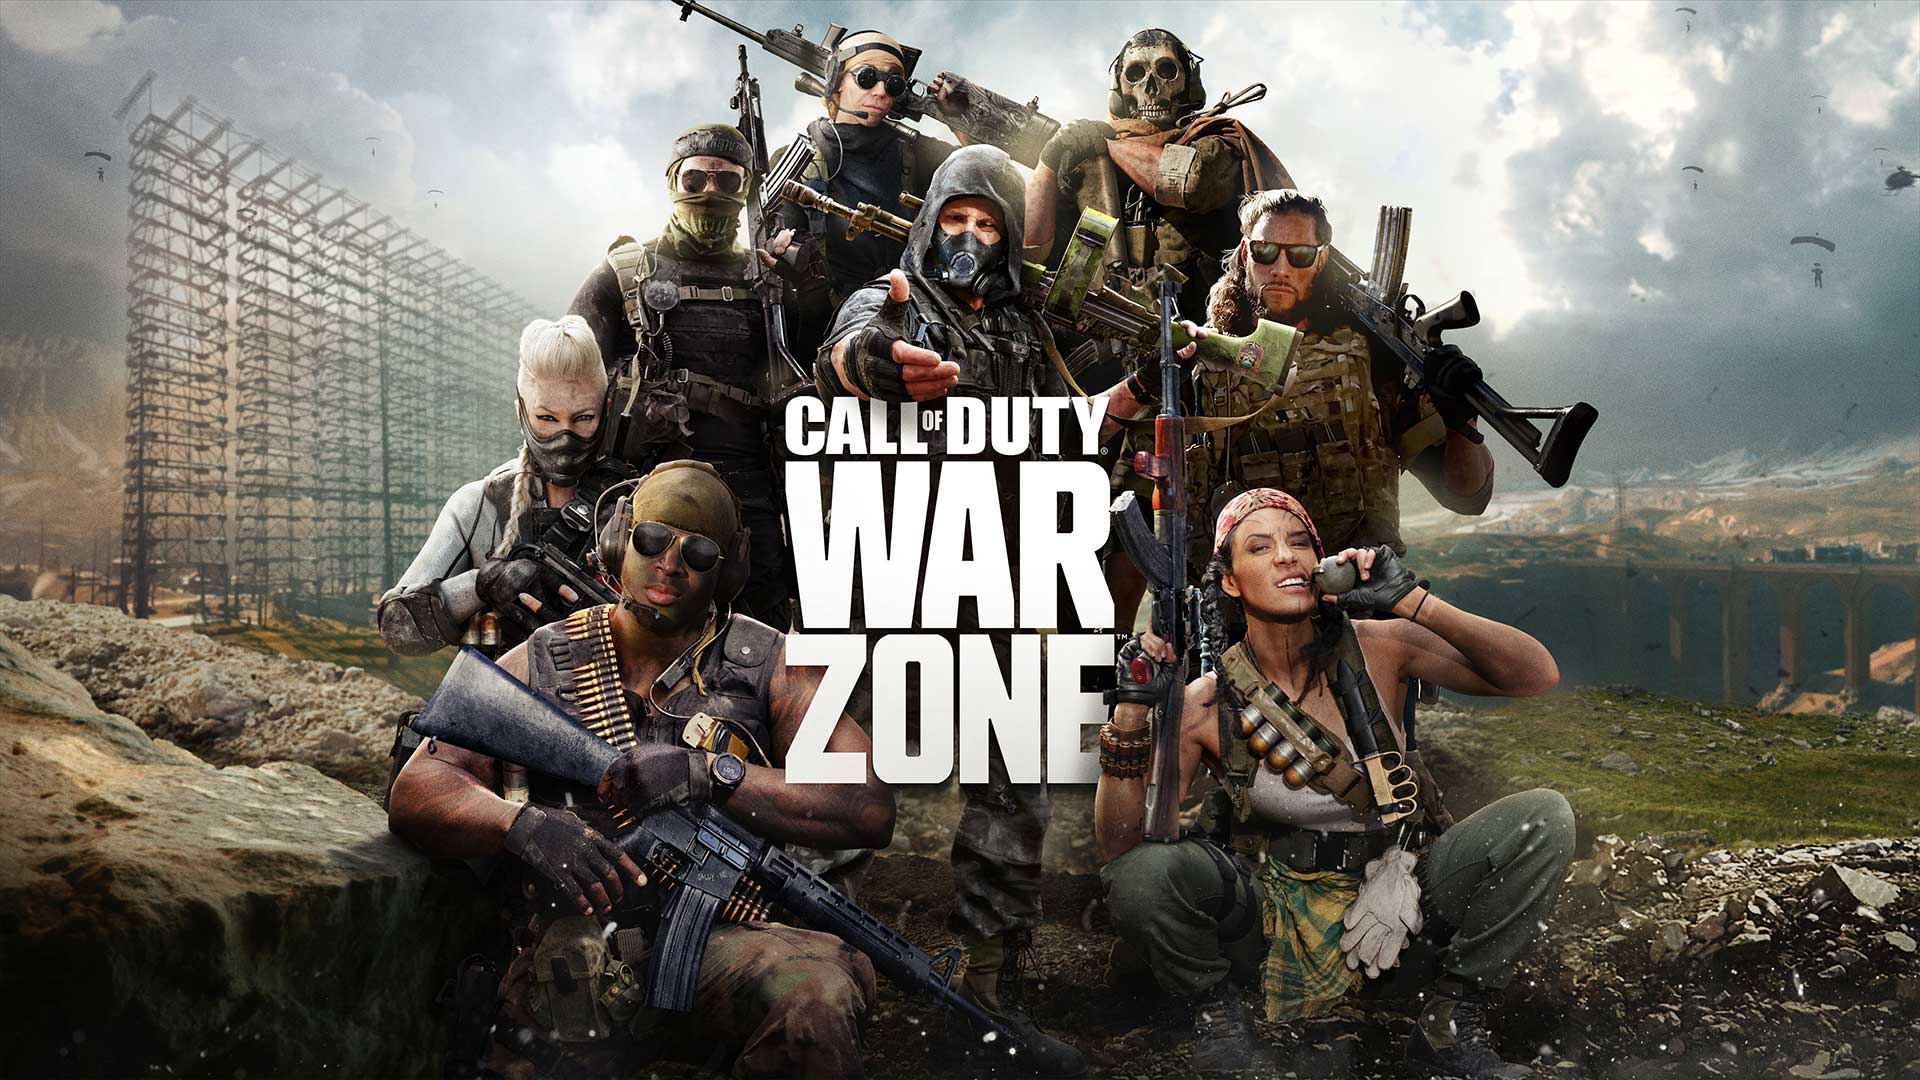 CALL OF DUTY WARZONE Version Full Game Free Download